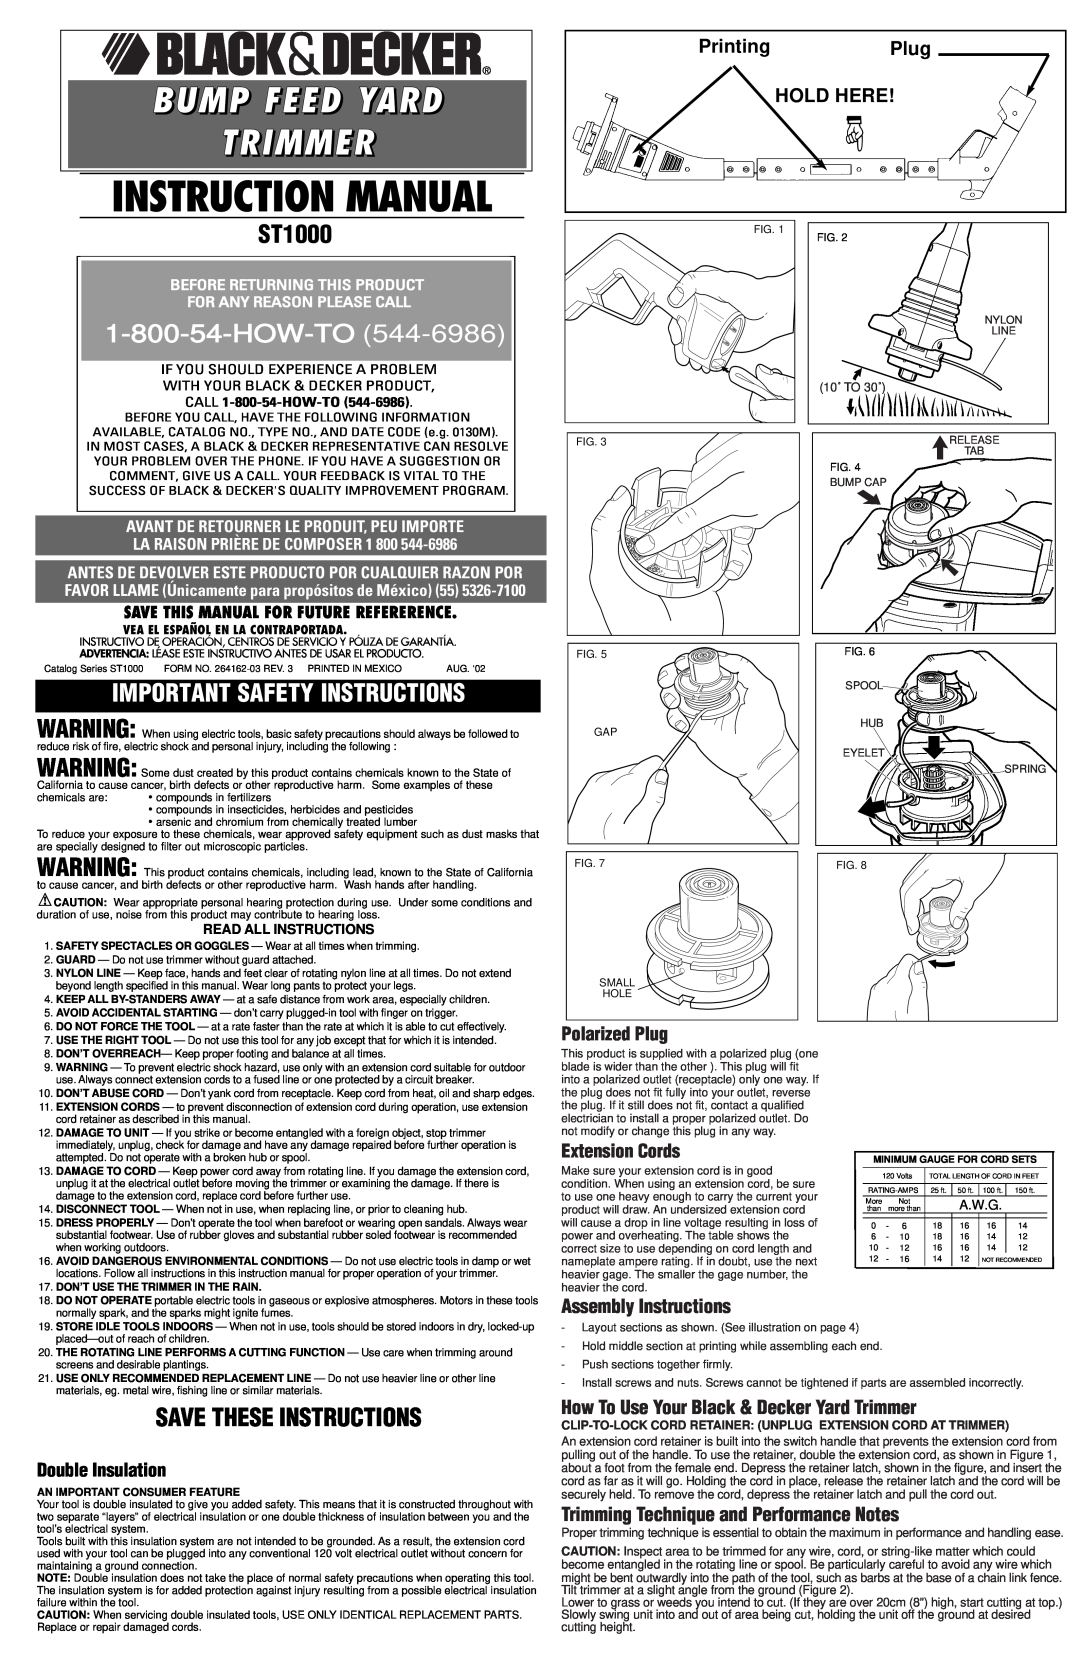 Black & Decker ST1000 instruction manual Printing Plug HOLD HERE, Double Insulation, Read All Instructions, How-To, A.W.G 